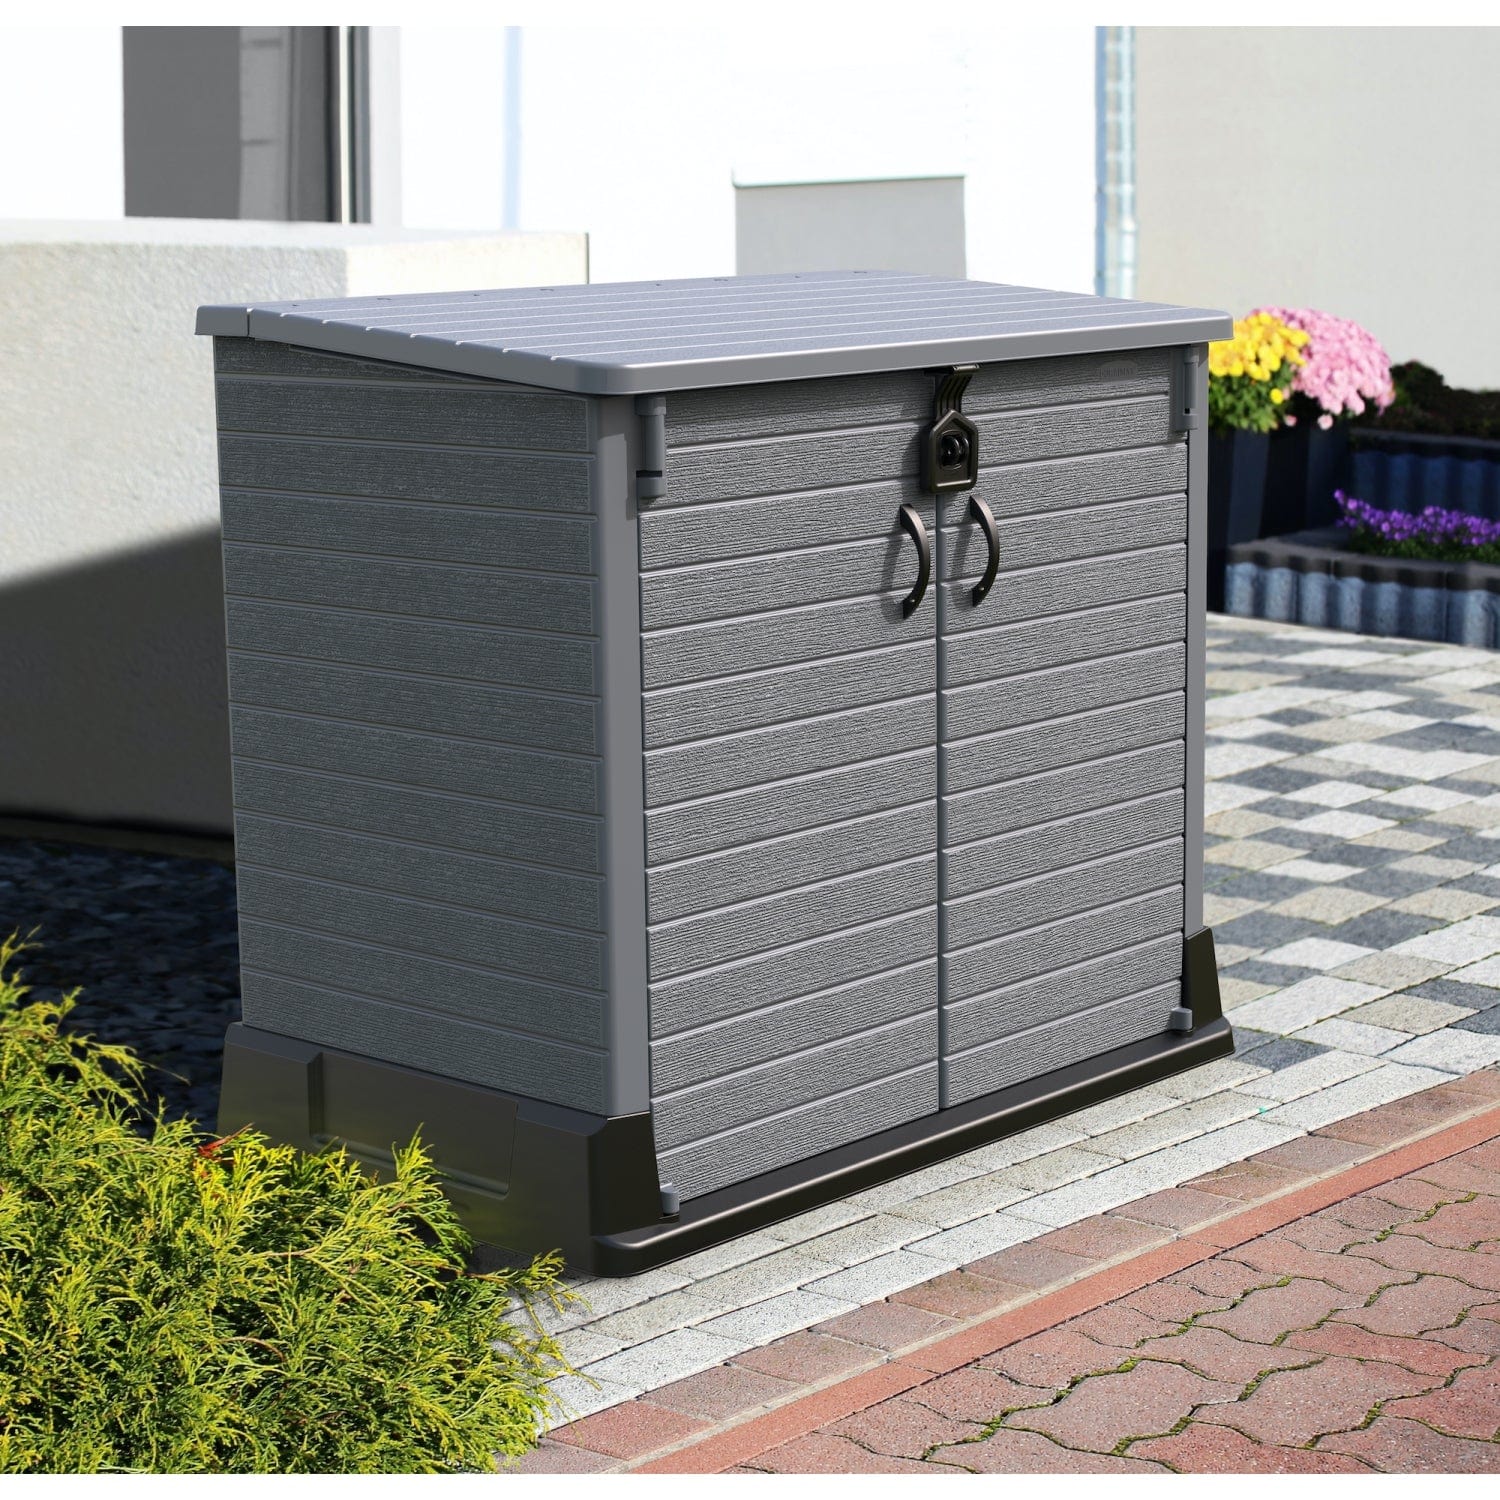 Duramax shed cabinet DuraMax | Heavy Plastic StoreAway Multipurpose Horizontal Shed with Flat Lid - 1200L - Gray 86630